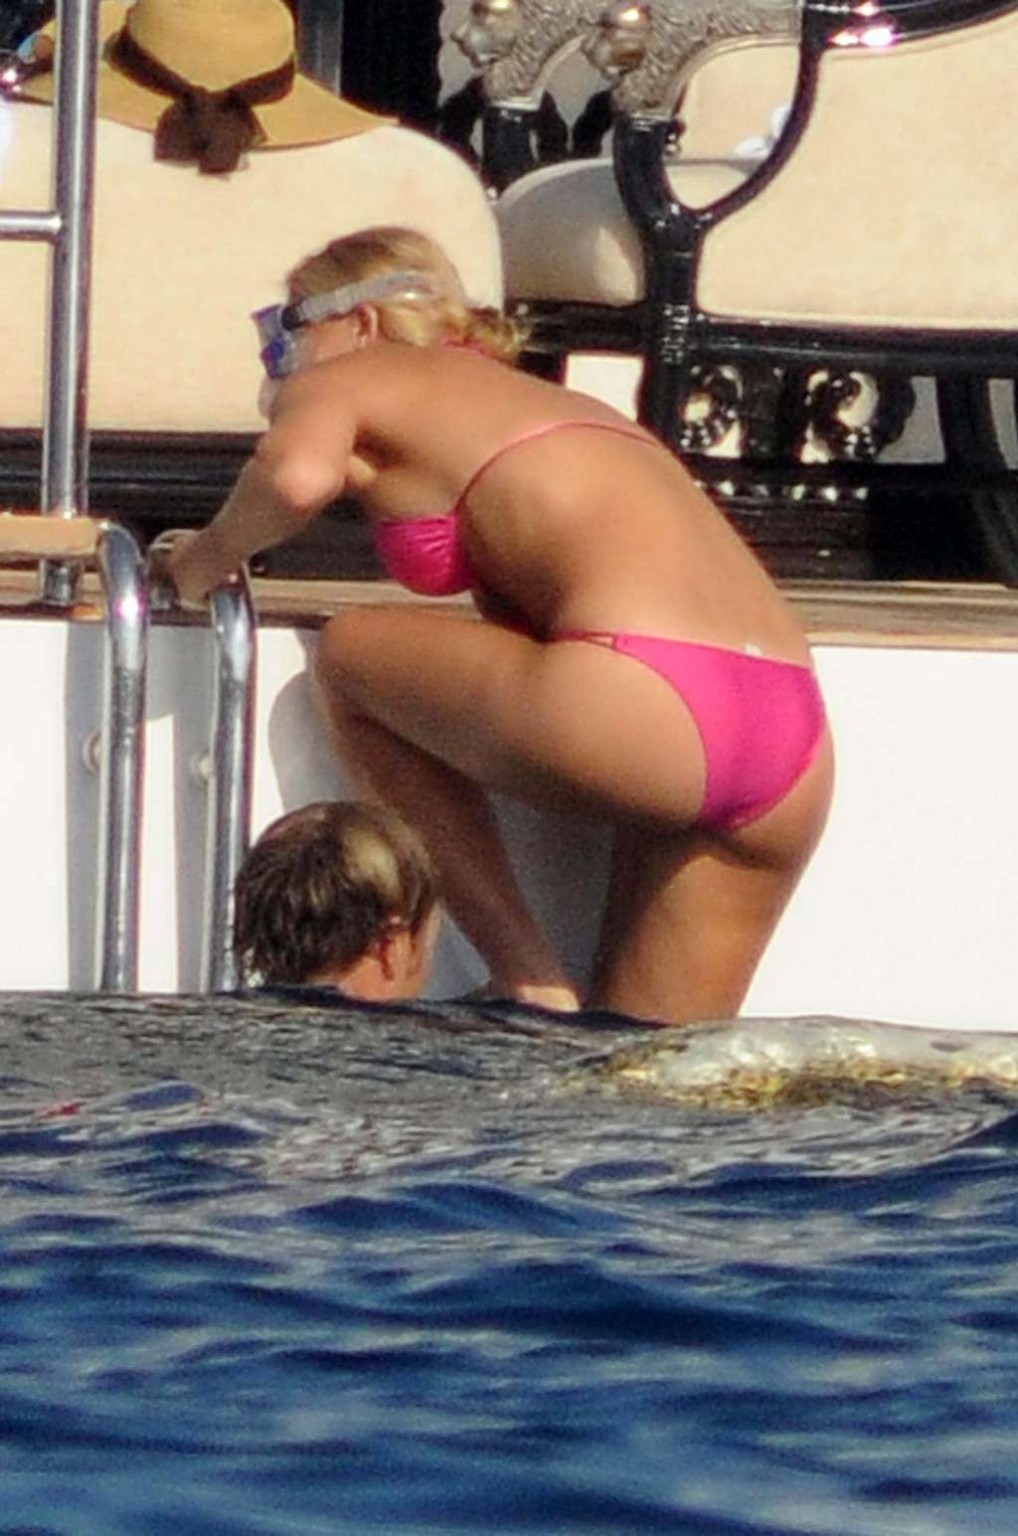 Bar Refaeli looking very sexy in red bikini on yacht paparazzi pictures #75336843